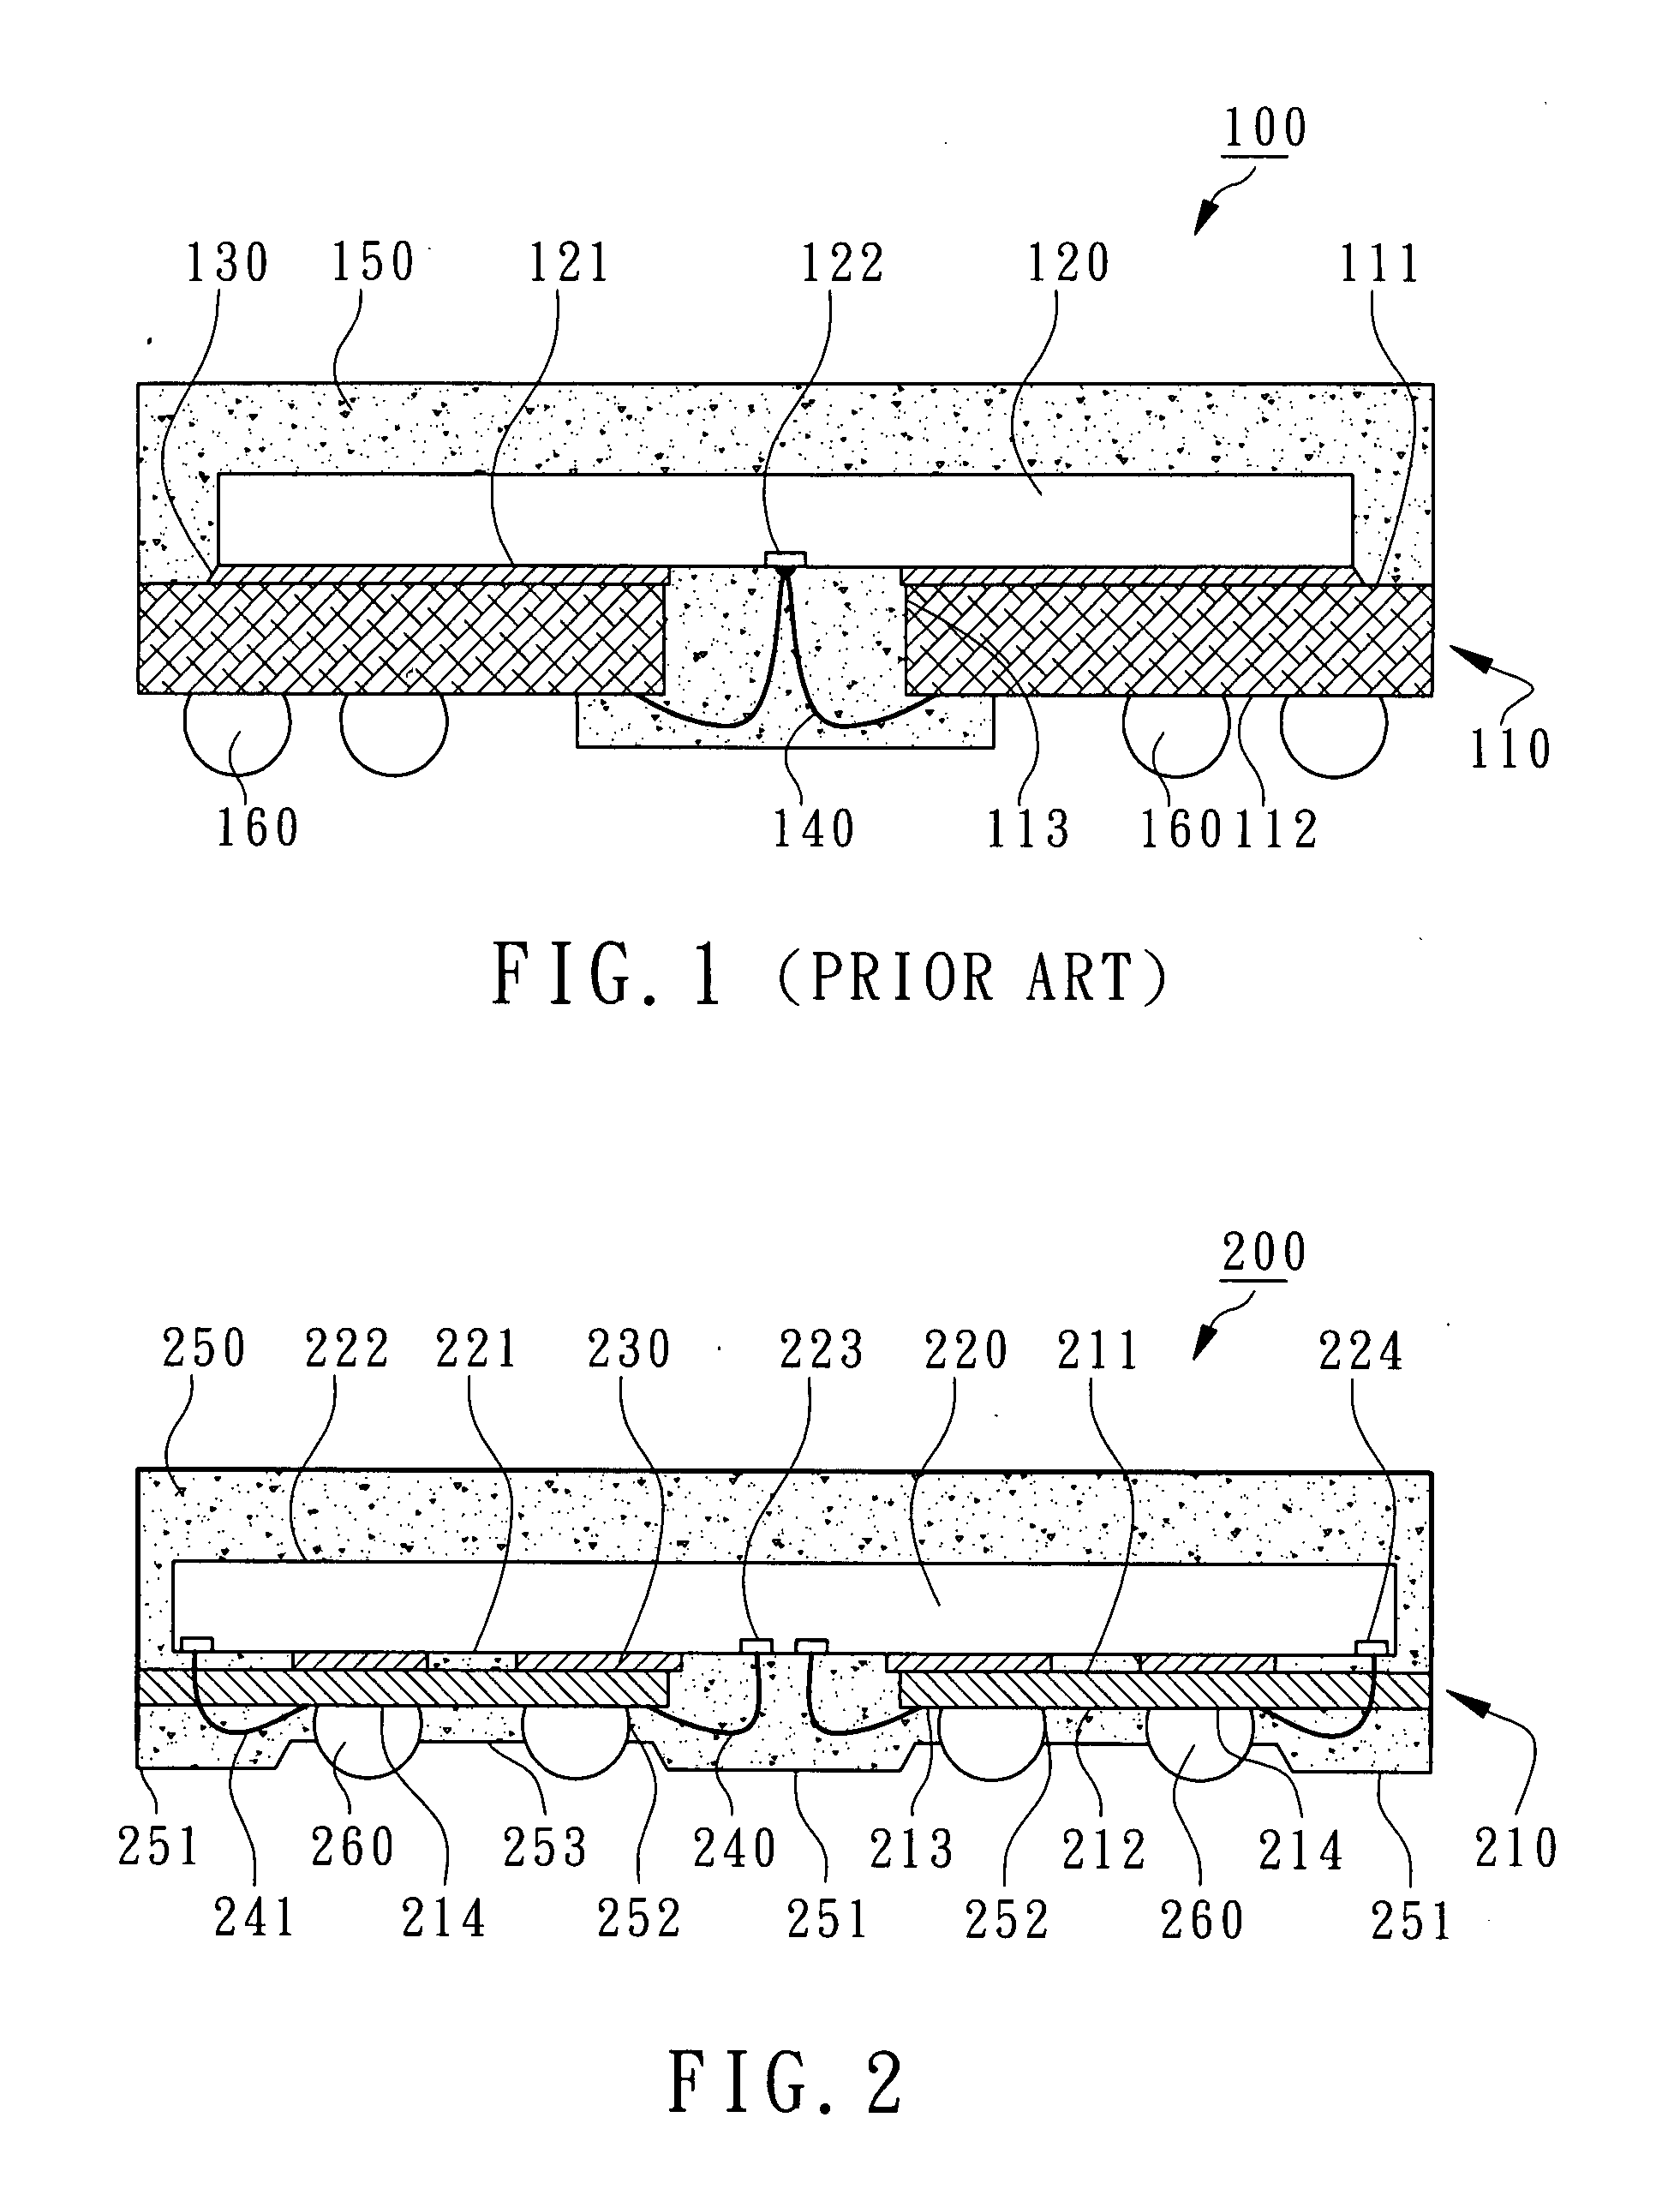 BGA package with leads on chip field of the invention